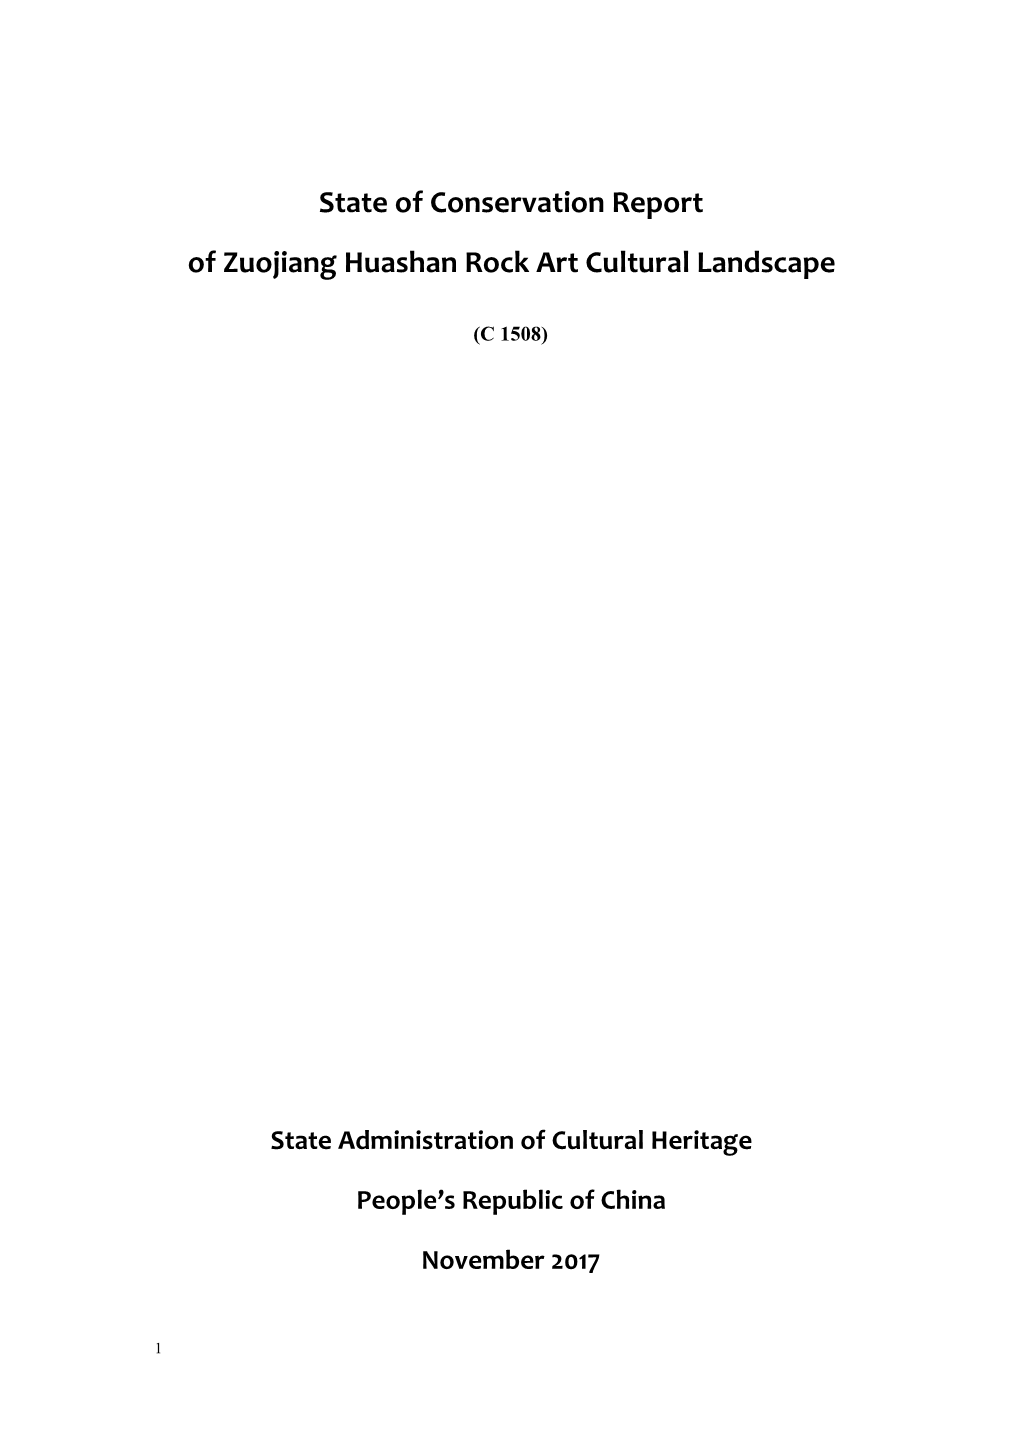 State of Conservation Report of Zuojiang Huashan Rock Art Cultural Landscape